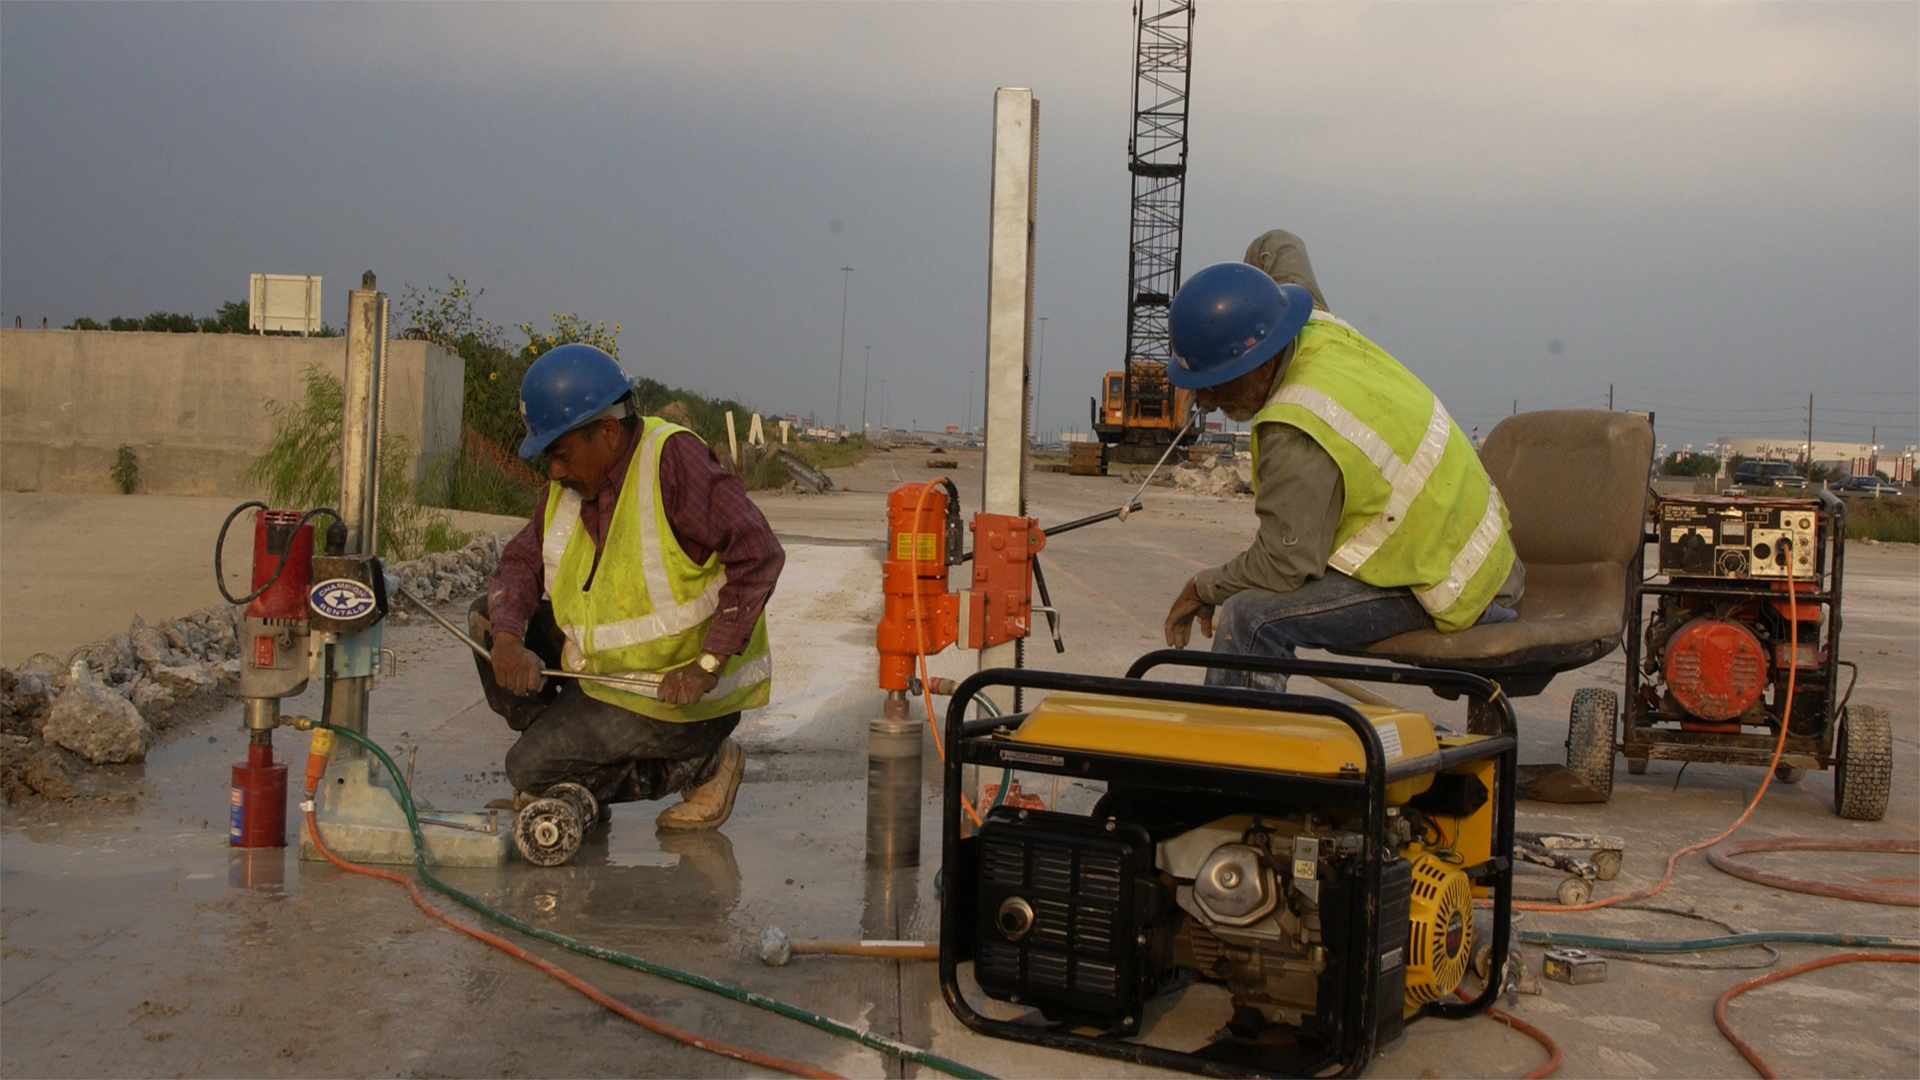 Workers using coring drills with generators